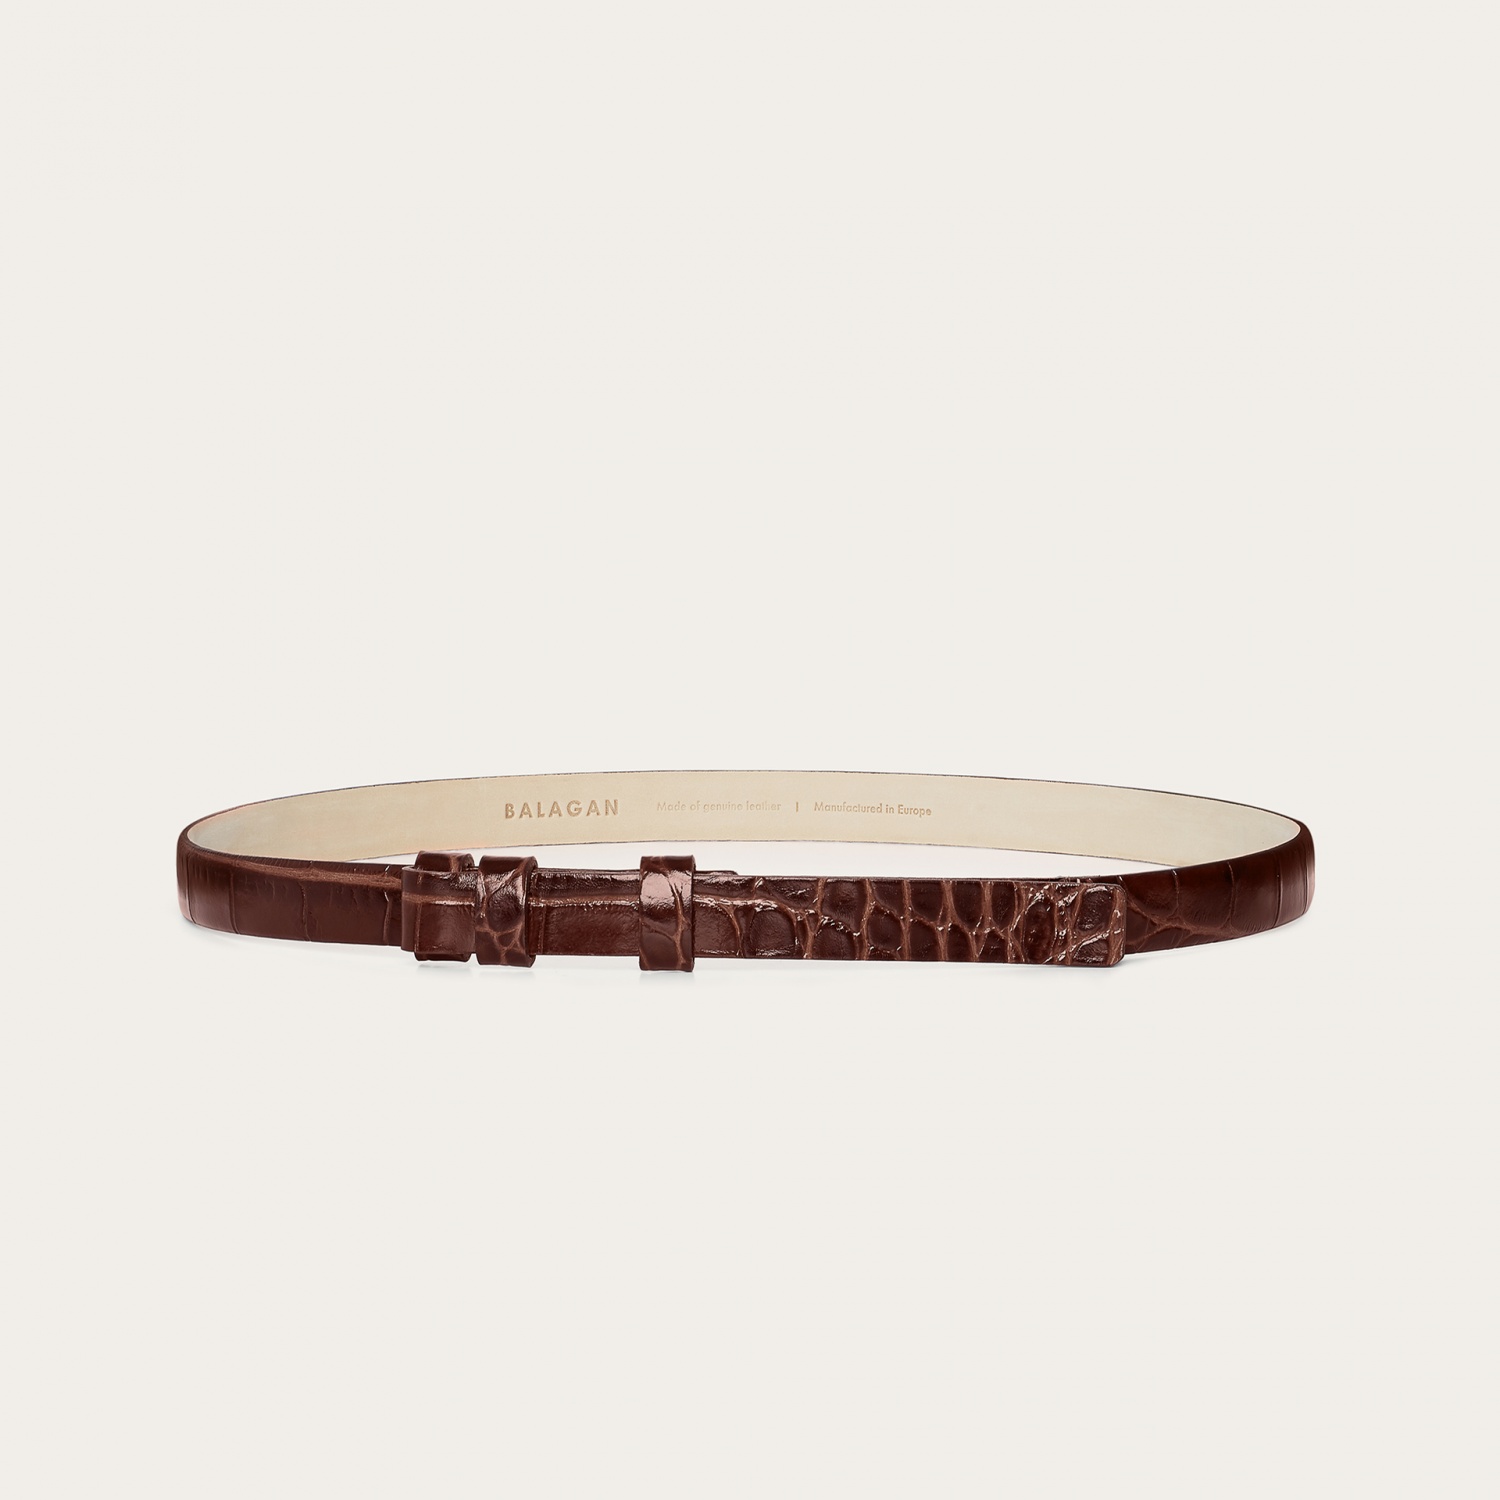  Thin belt without a buckle, brown croco-3 